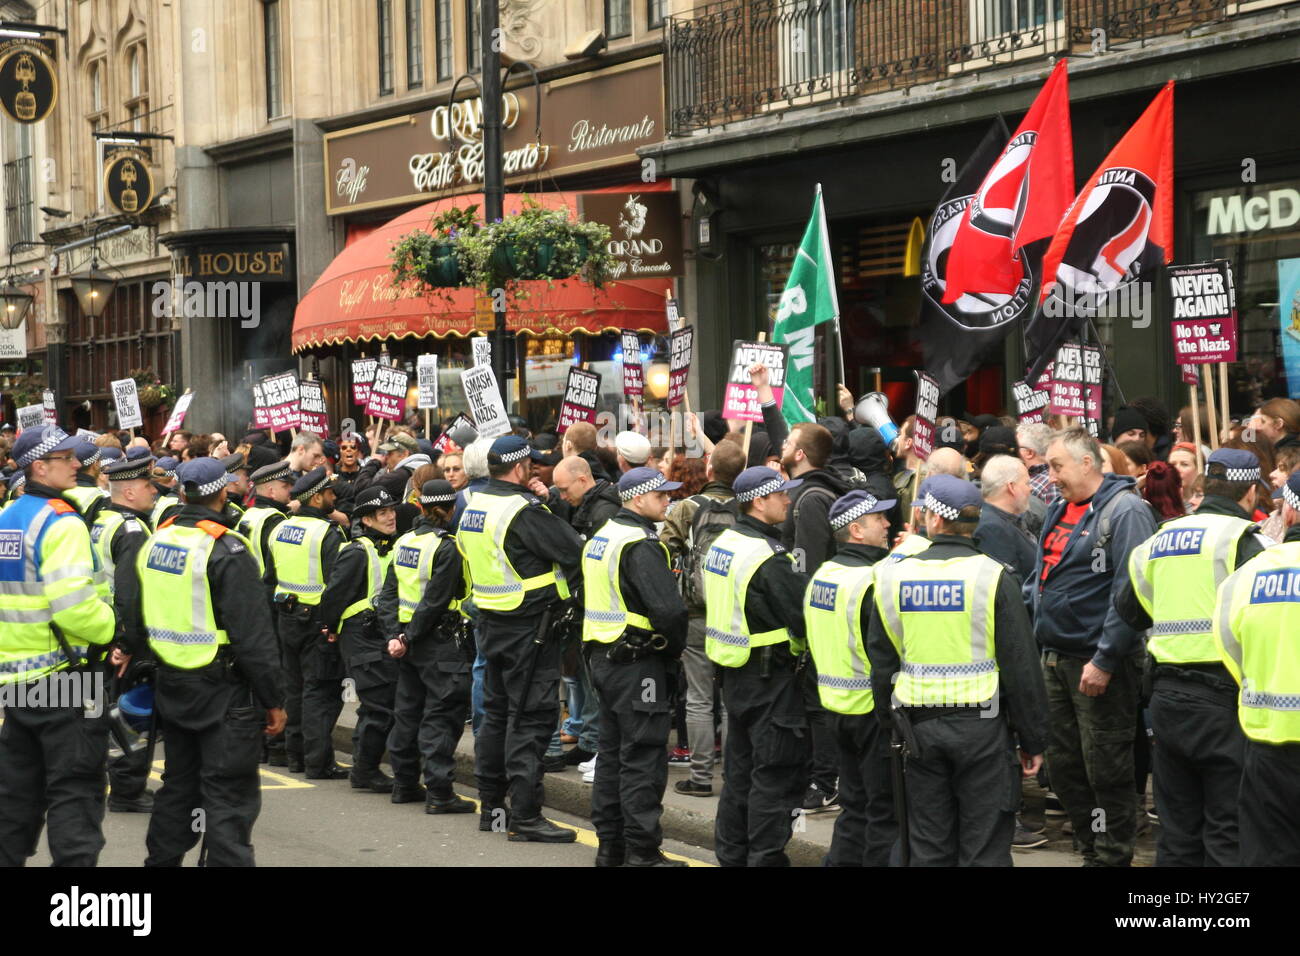 London, UK. April 1st, 2017. The anti-racism demo is surrounded by police in Whitehall. Far right groups Britain First and the English Defence League (EDL) Hold a rally in Whitehall, drawing on the recent terrorist attack in nearby Westminster as a justification. A counter 'unity demo' is held by Unite against Facism (UAF). Credit: Roland Ravenhill/Alamy Live News Stock Photo